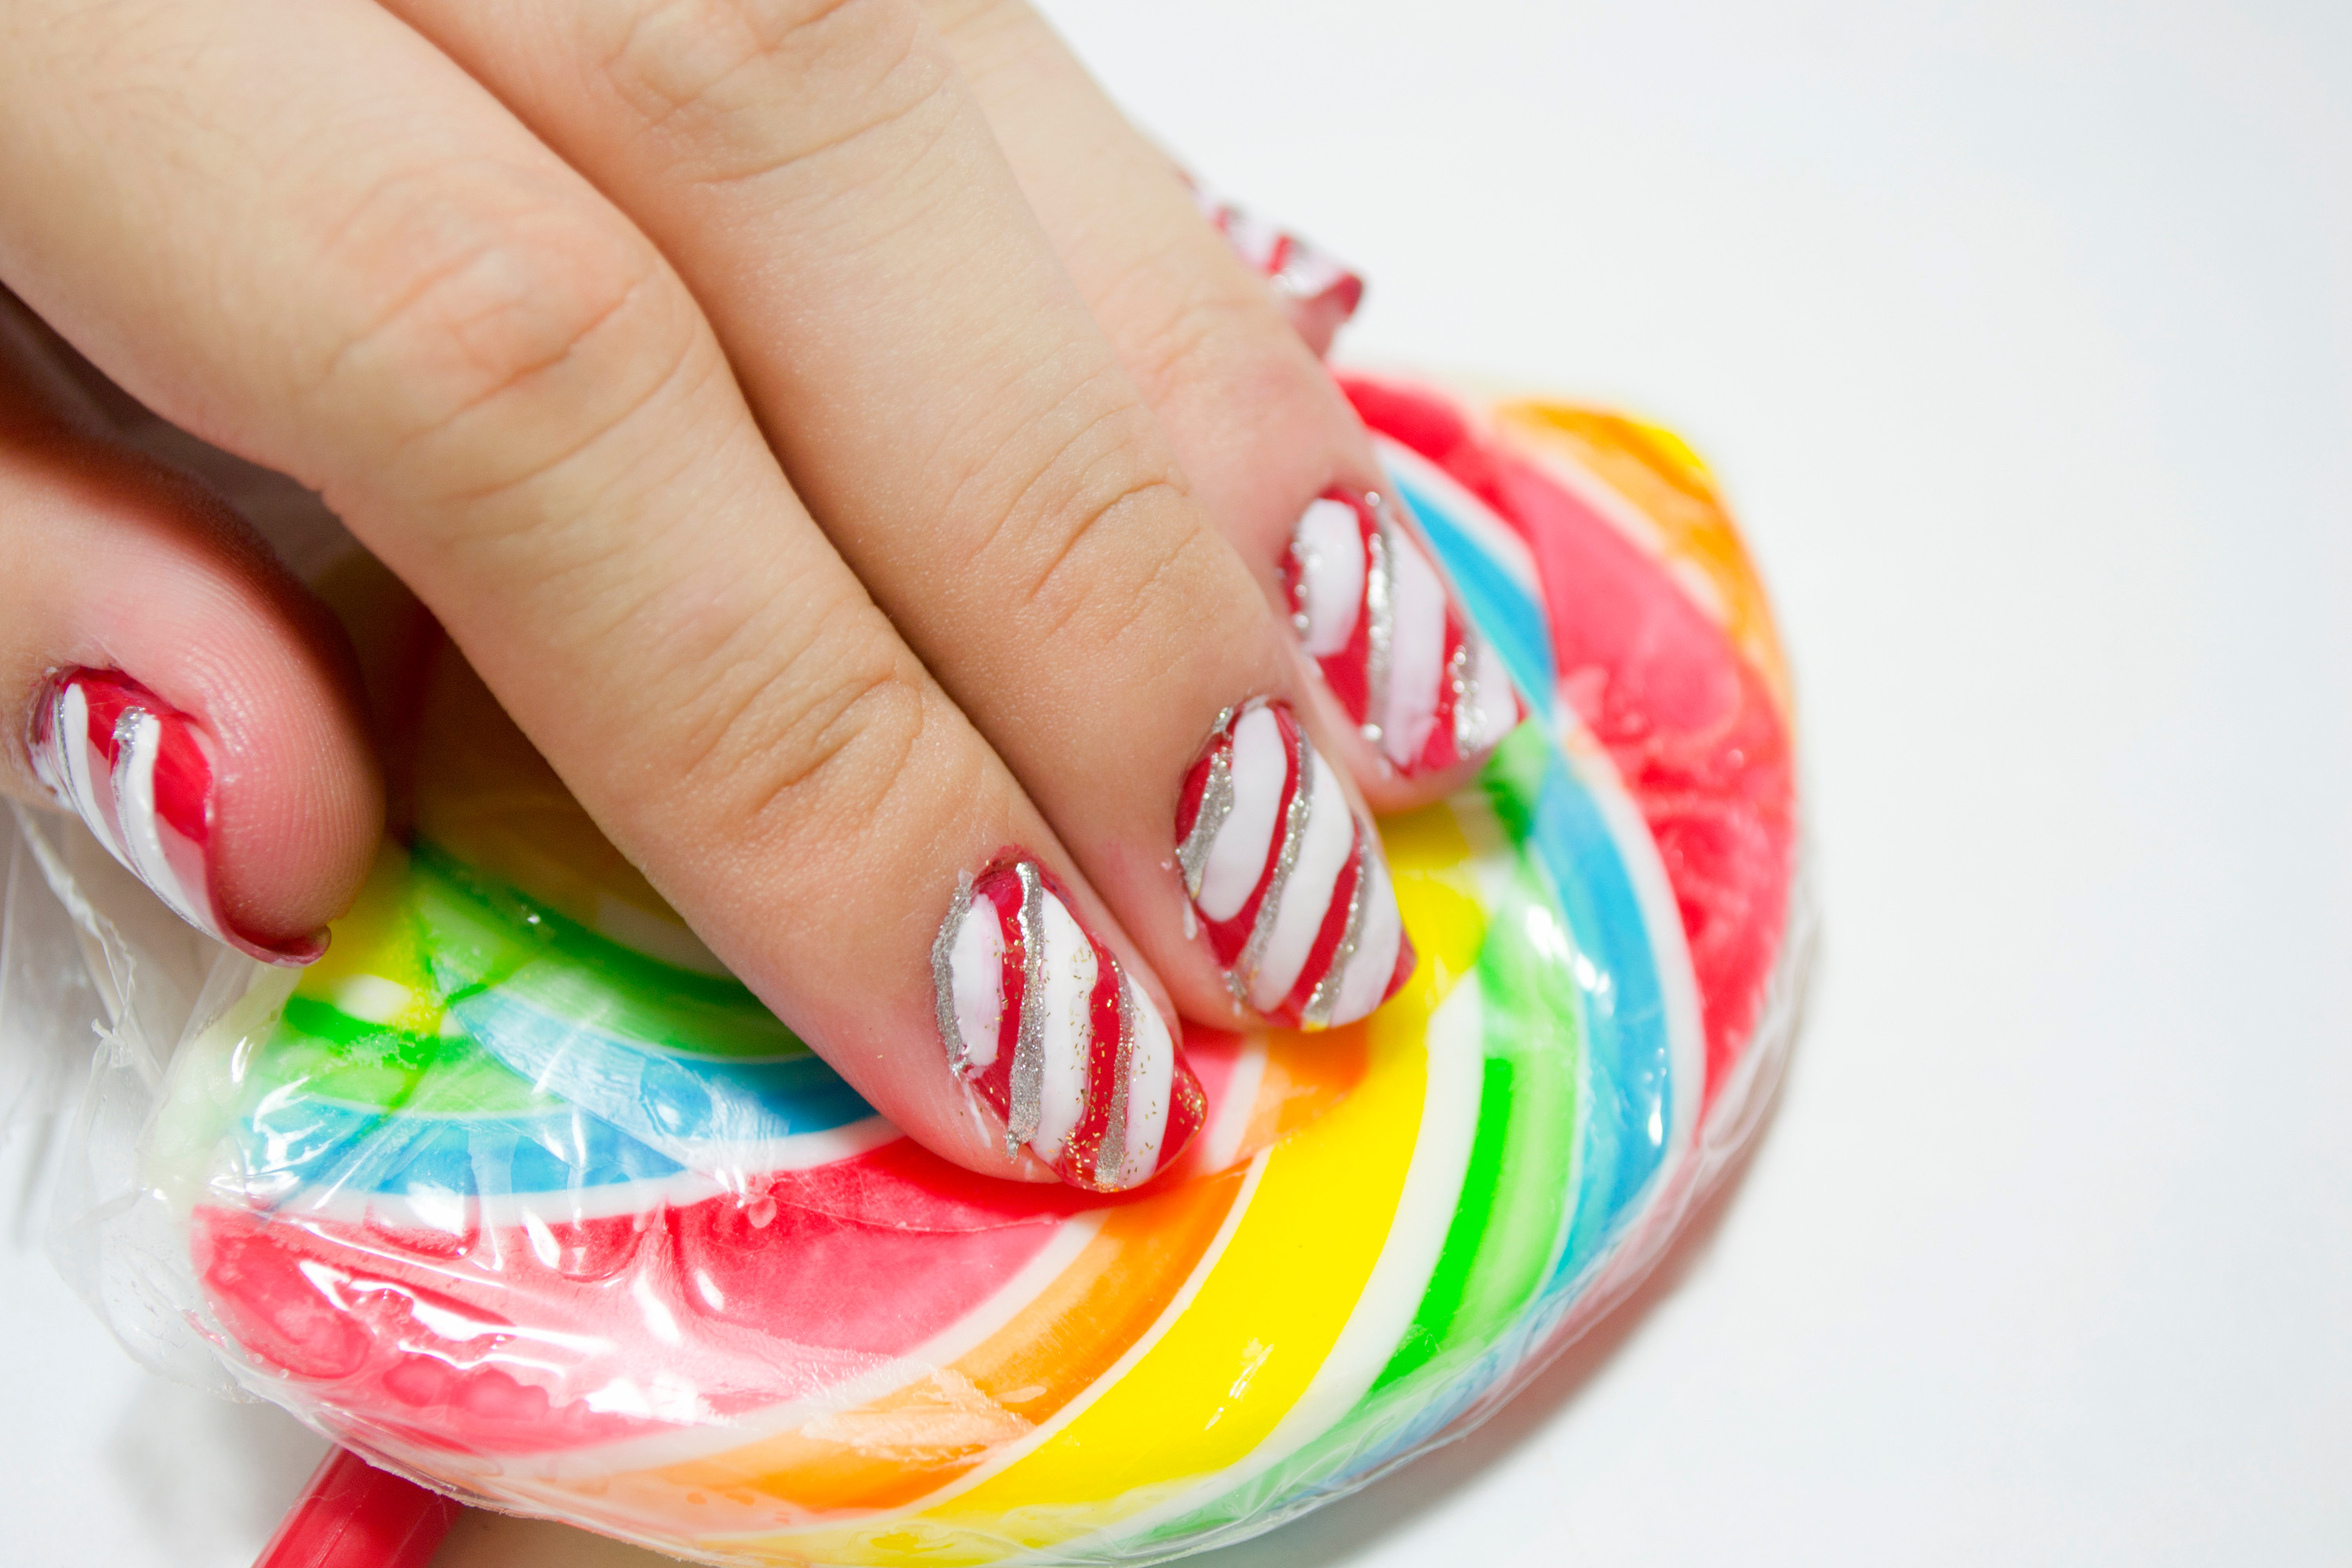 Christmas Nails Candy Cane
 How to Make a Christmas Candy Cane Design on Your Nails